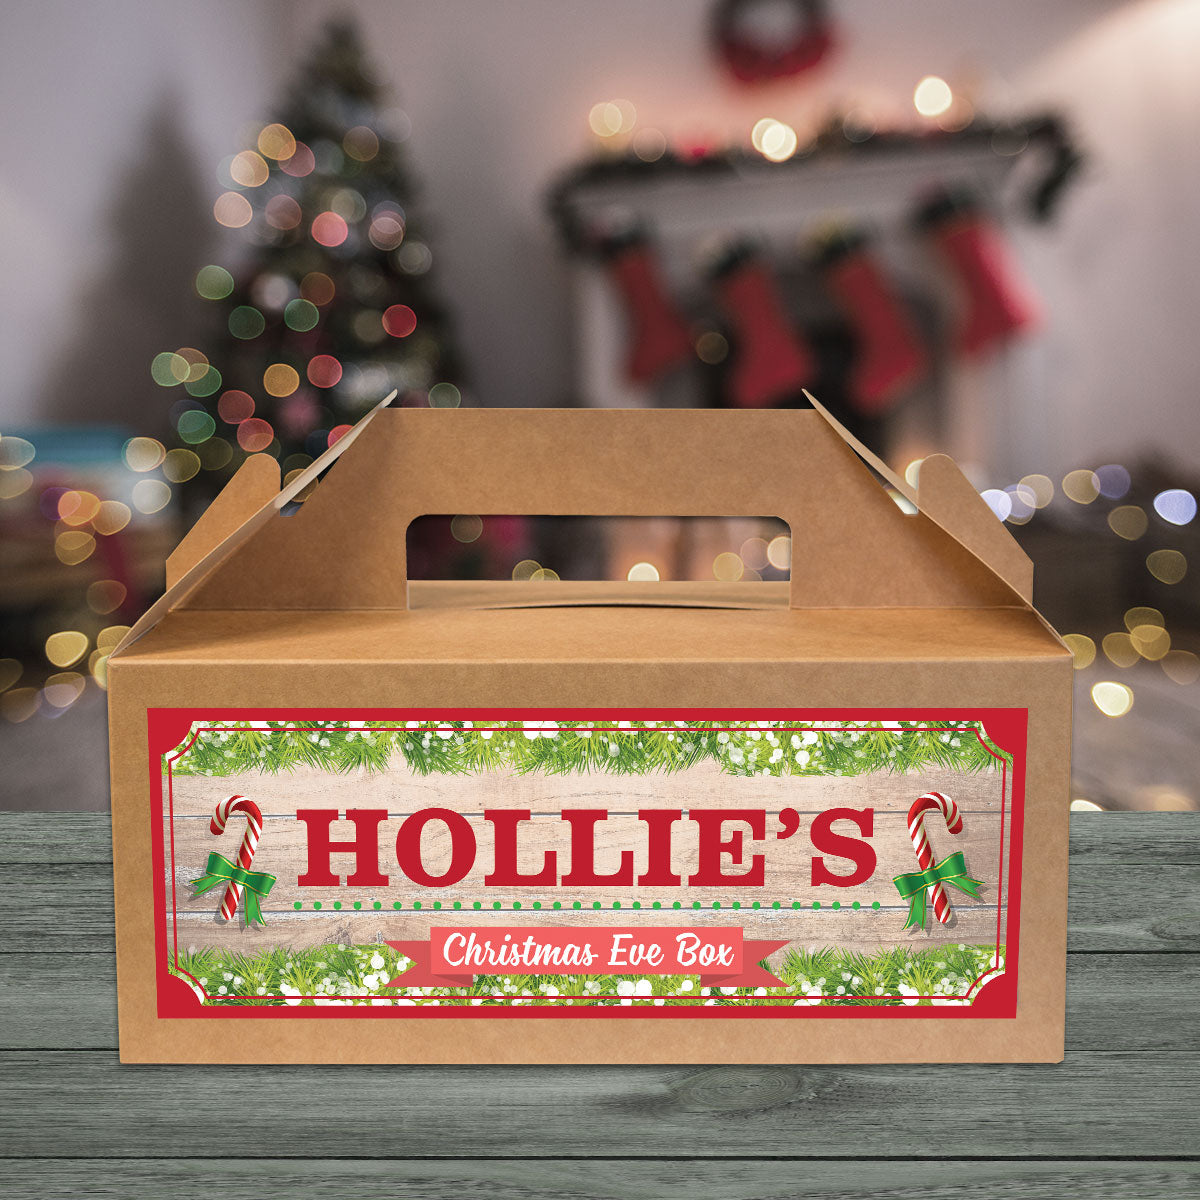 Personalised Christmas Eve Box - Sprit Alive!